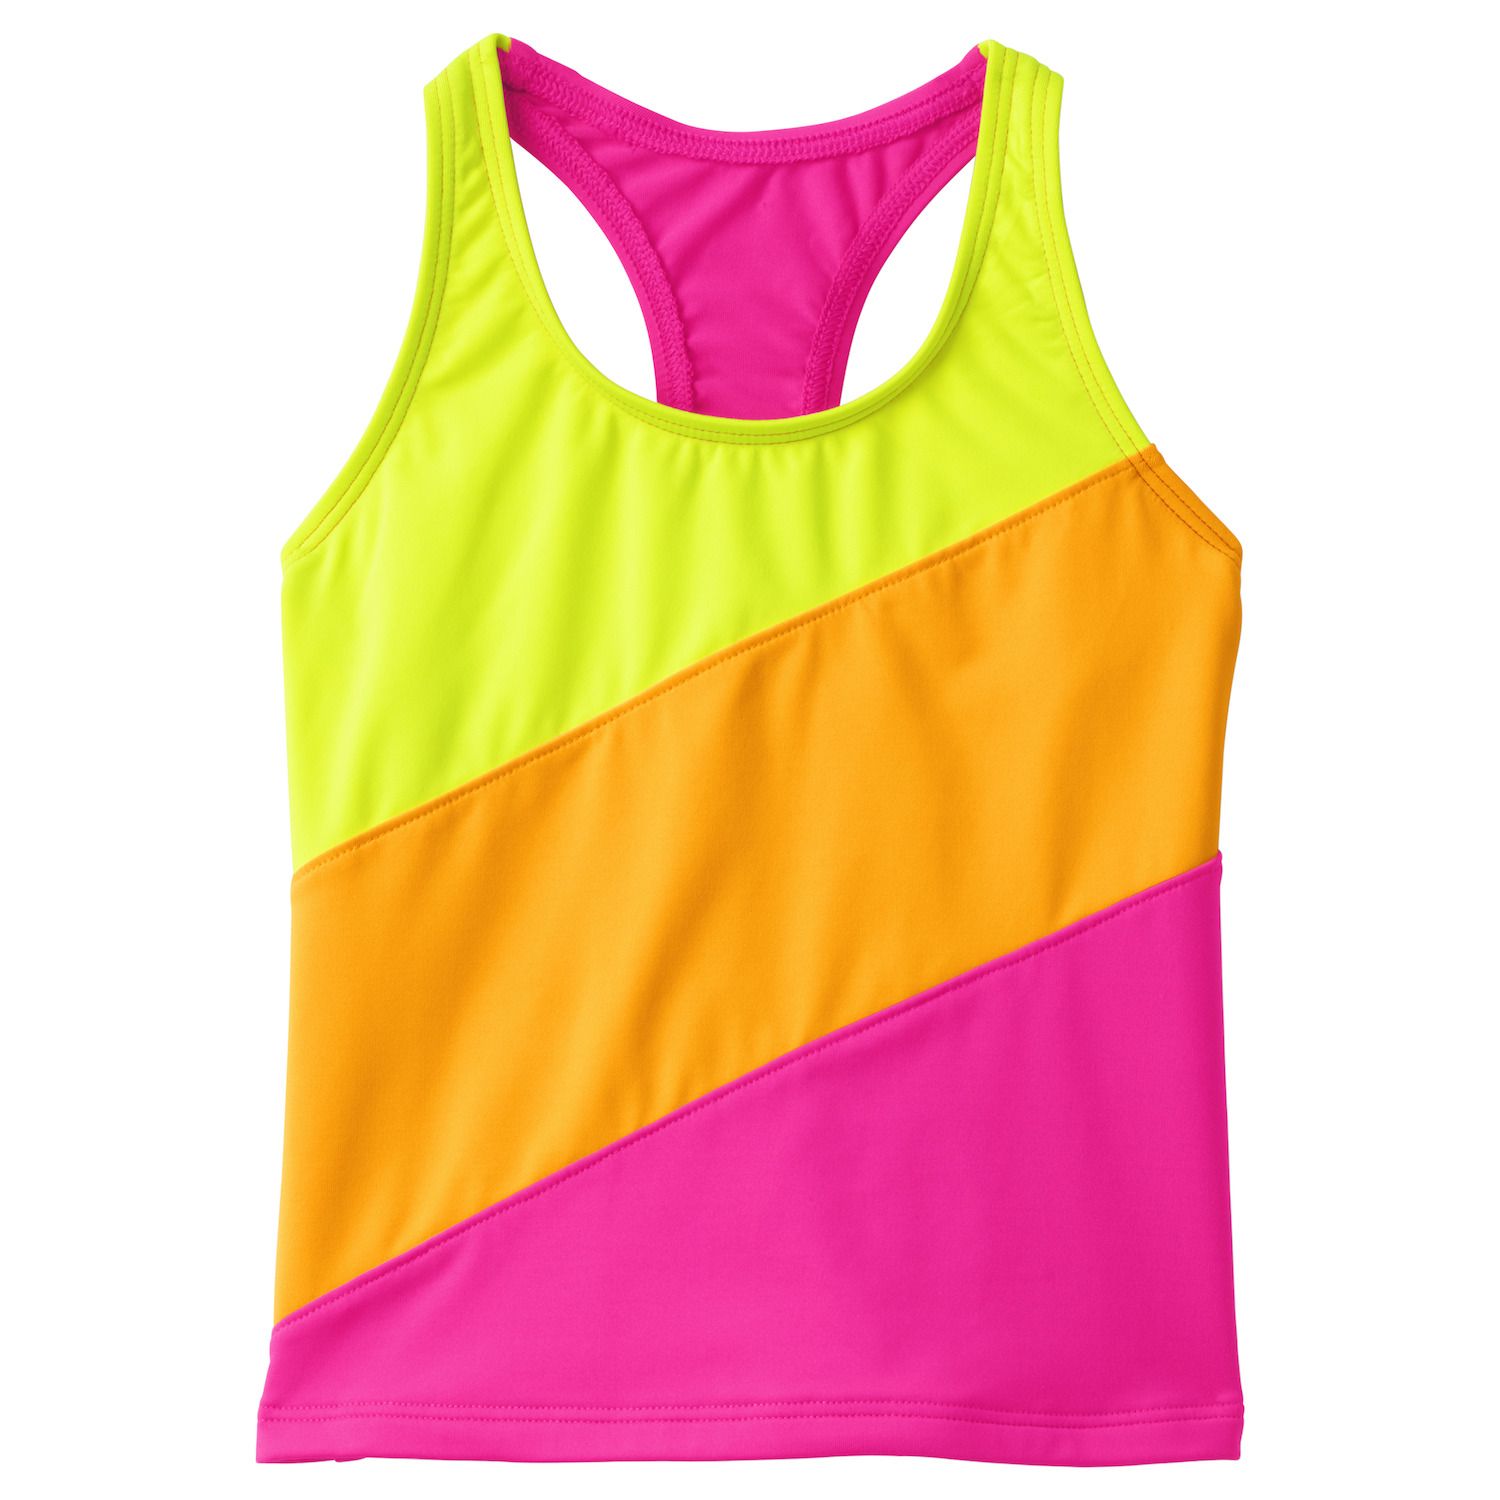 Image for Lands' End Toddler Girl Colorblock Tankini Top at Kohl's.